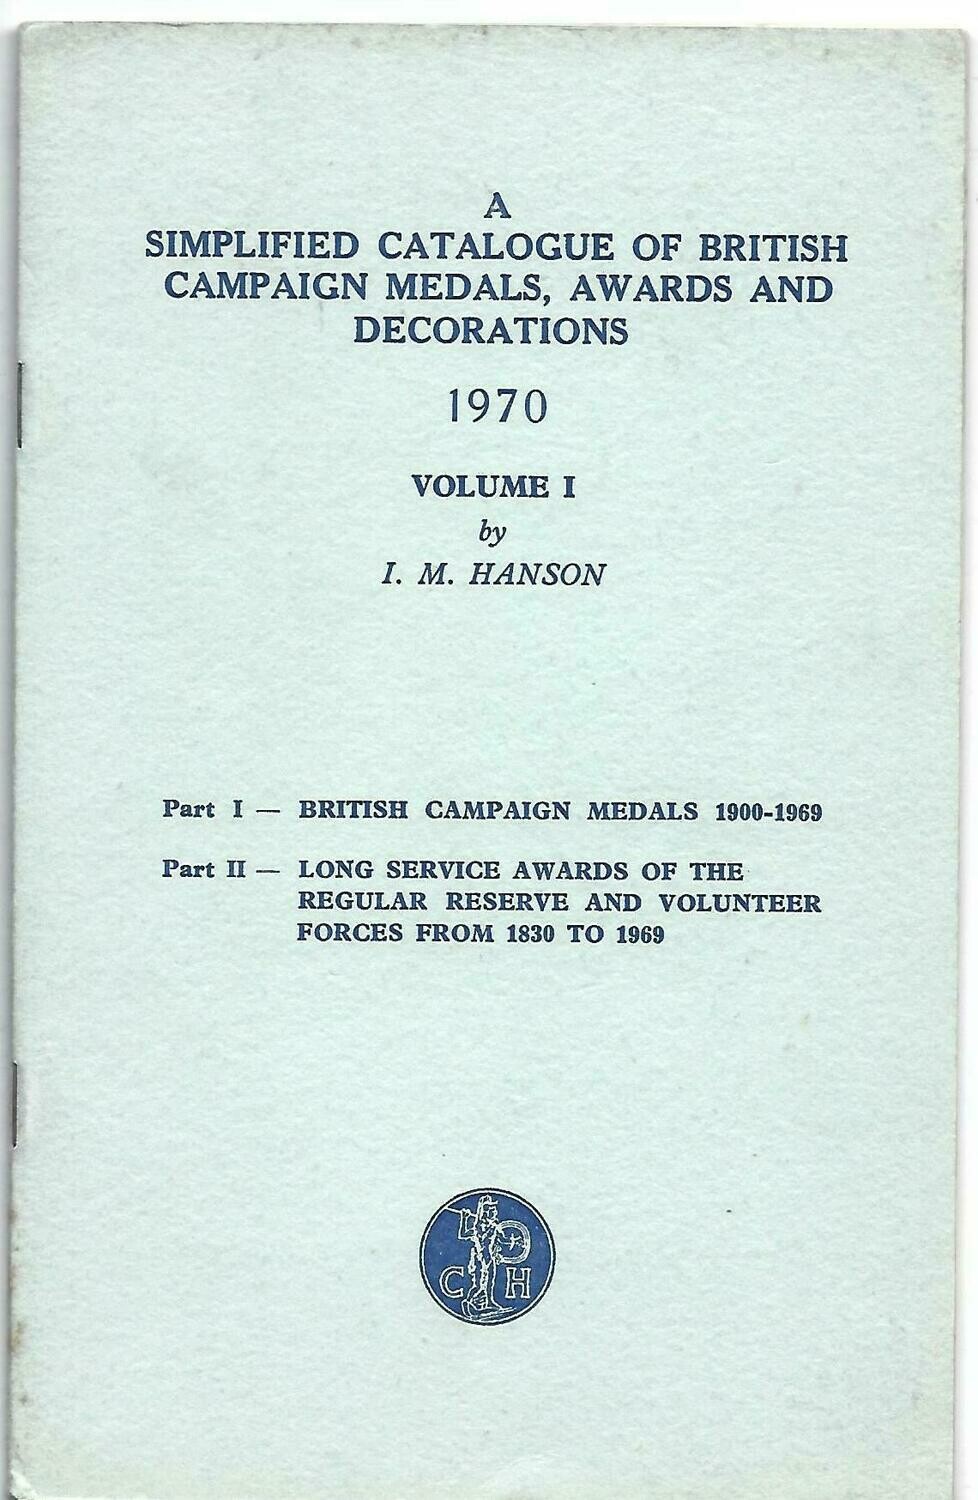 British; I.M. Hanson, "A Simplified Catalogue of British Campaign Medals, Awards and Decorations, volume 1"